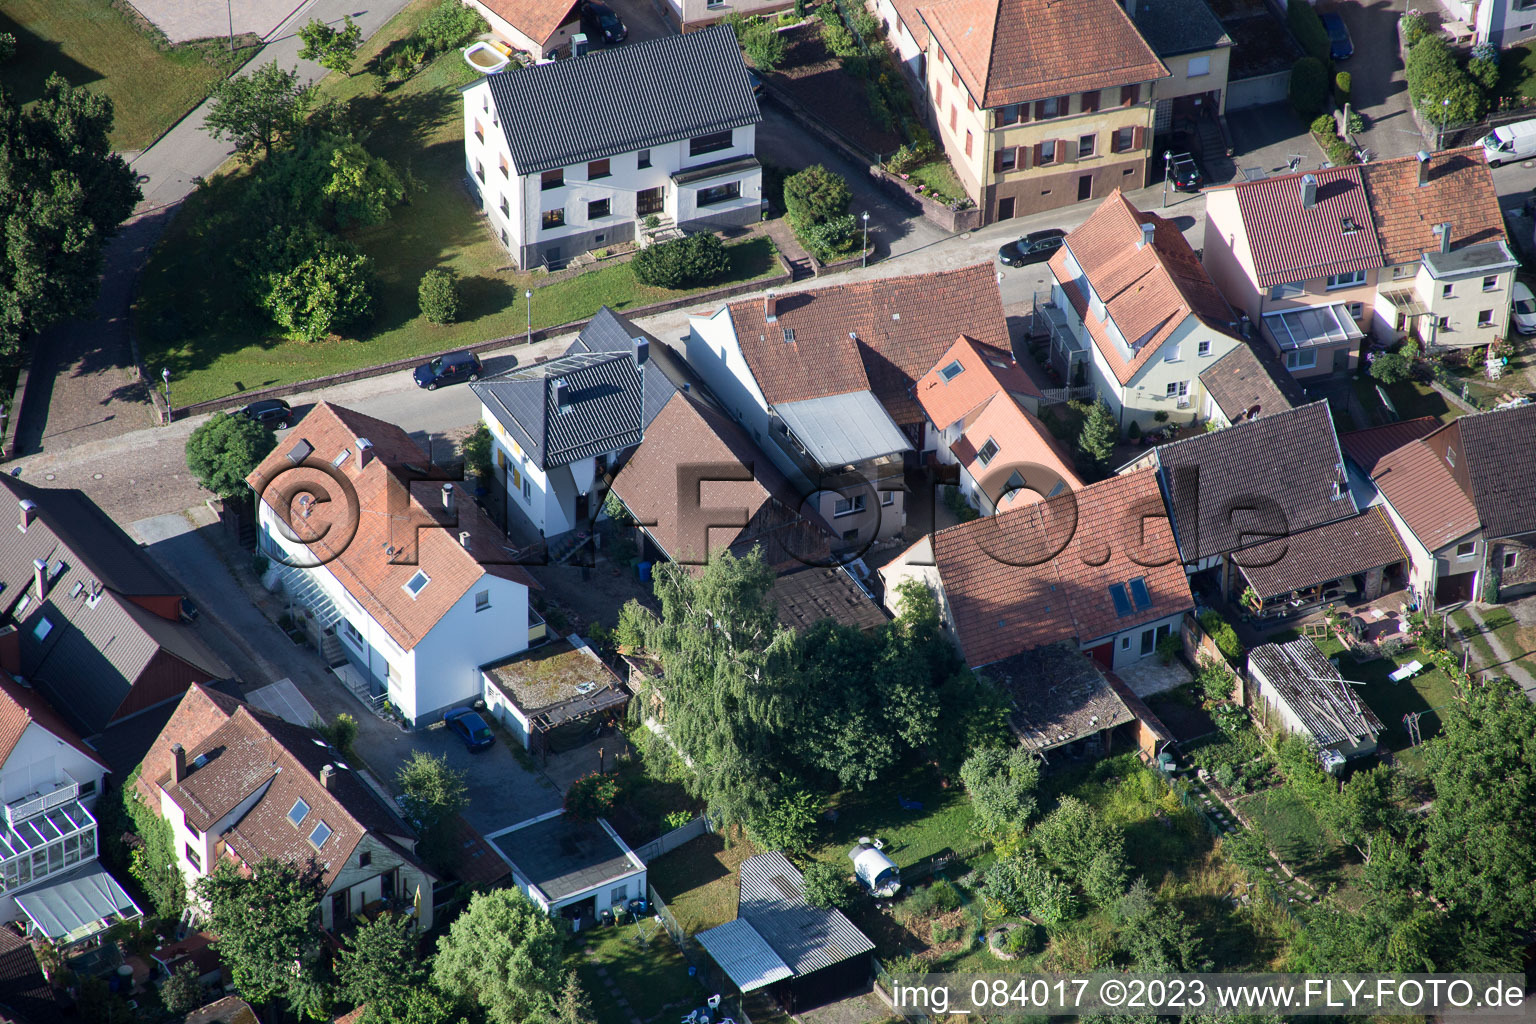 District Schluttenbach in Ettlingen in the state Baden-Wuerttemberg, Germany from the drone perspective